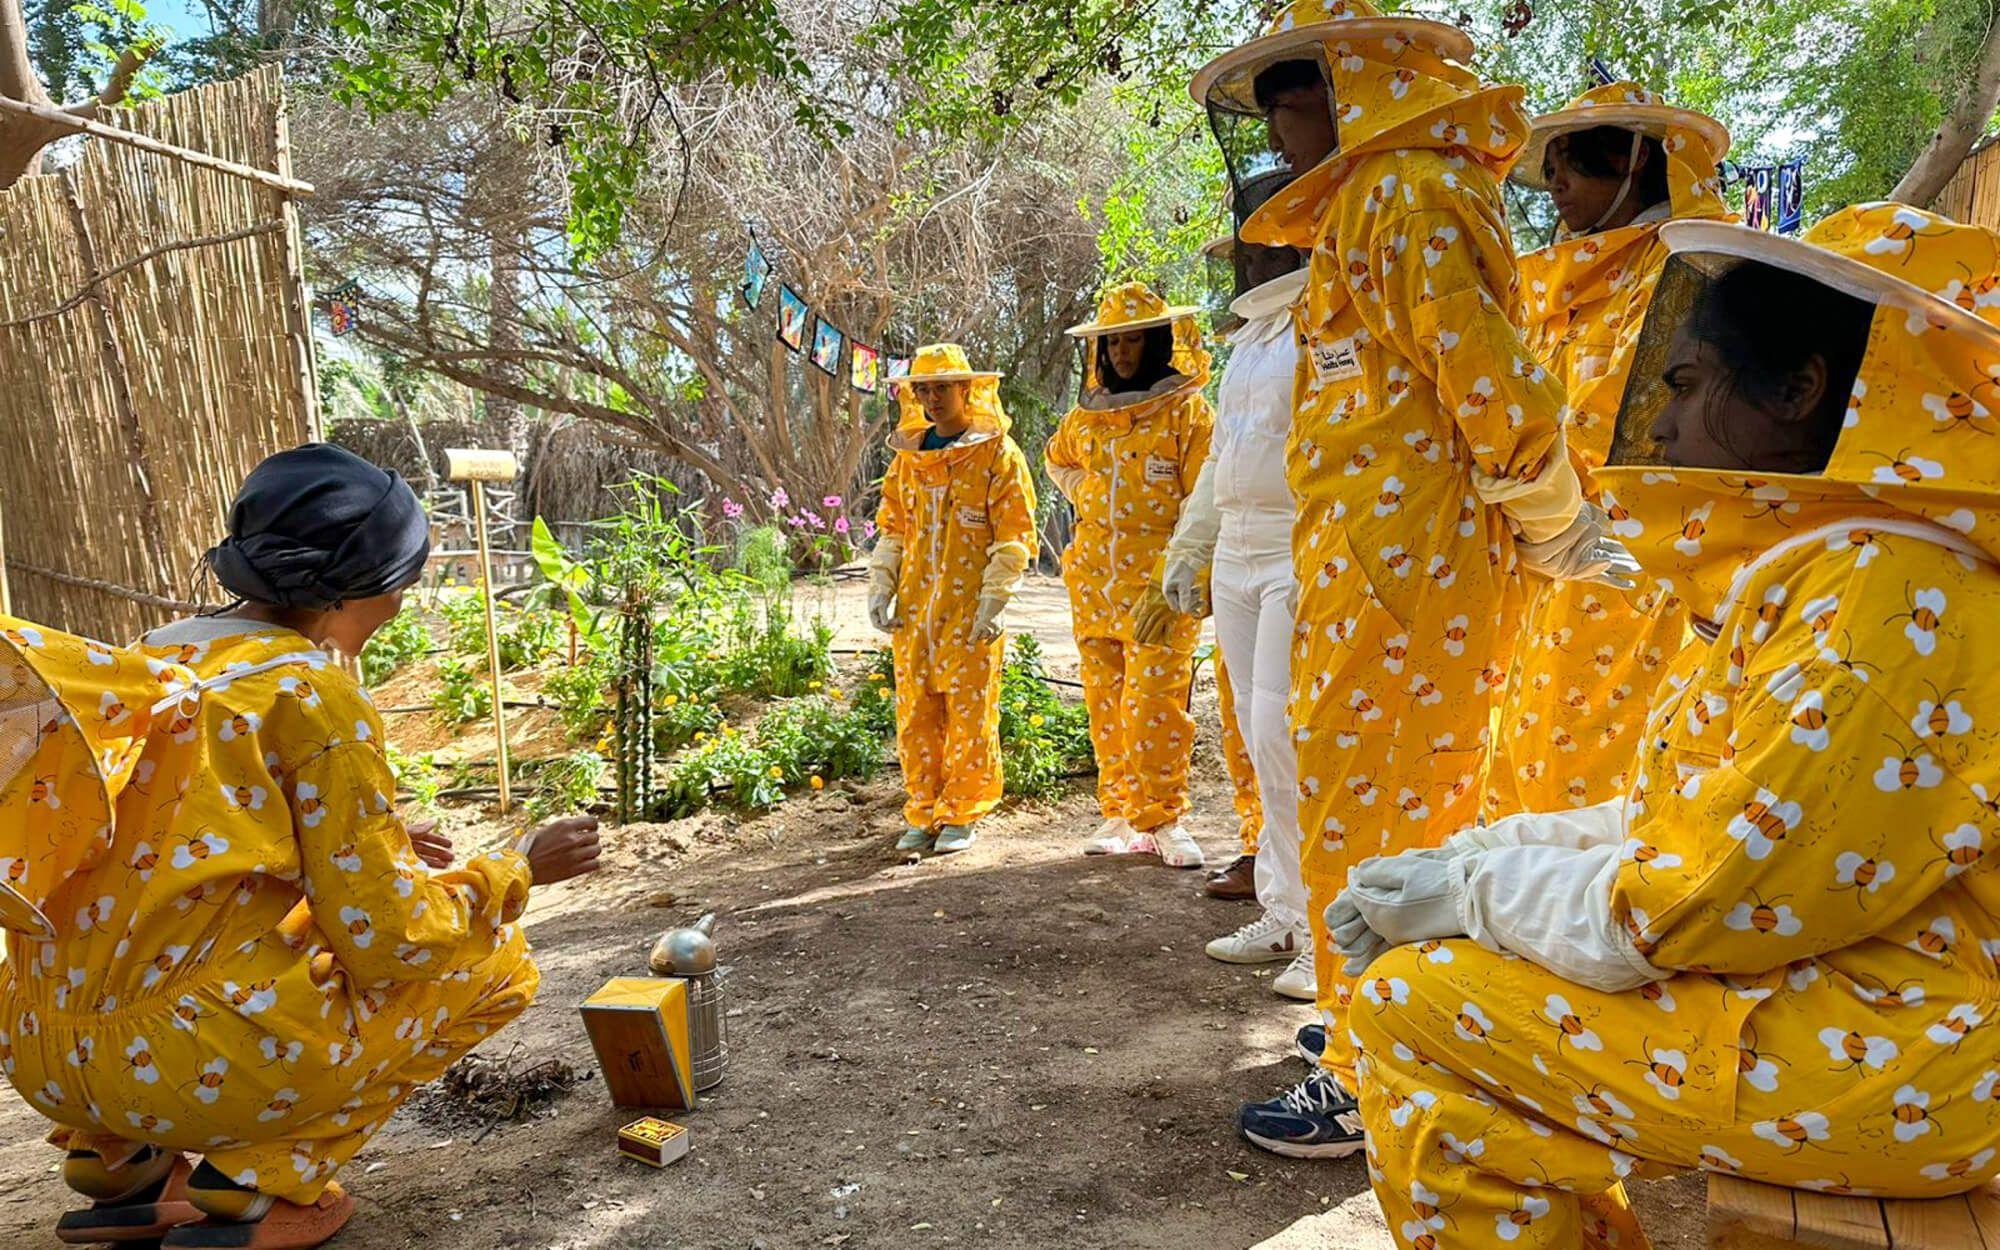 Bees are crucial pollinators–preserving and protecting these species has become Meriem’s life work.
Photo: One Hive